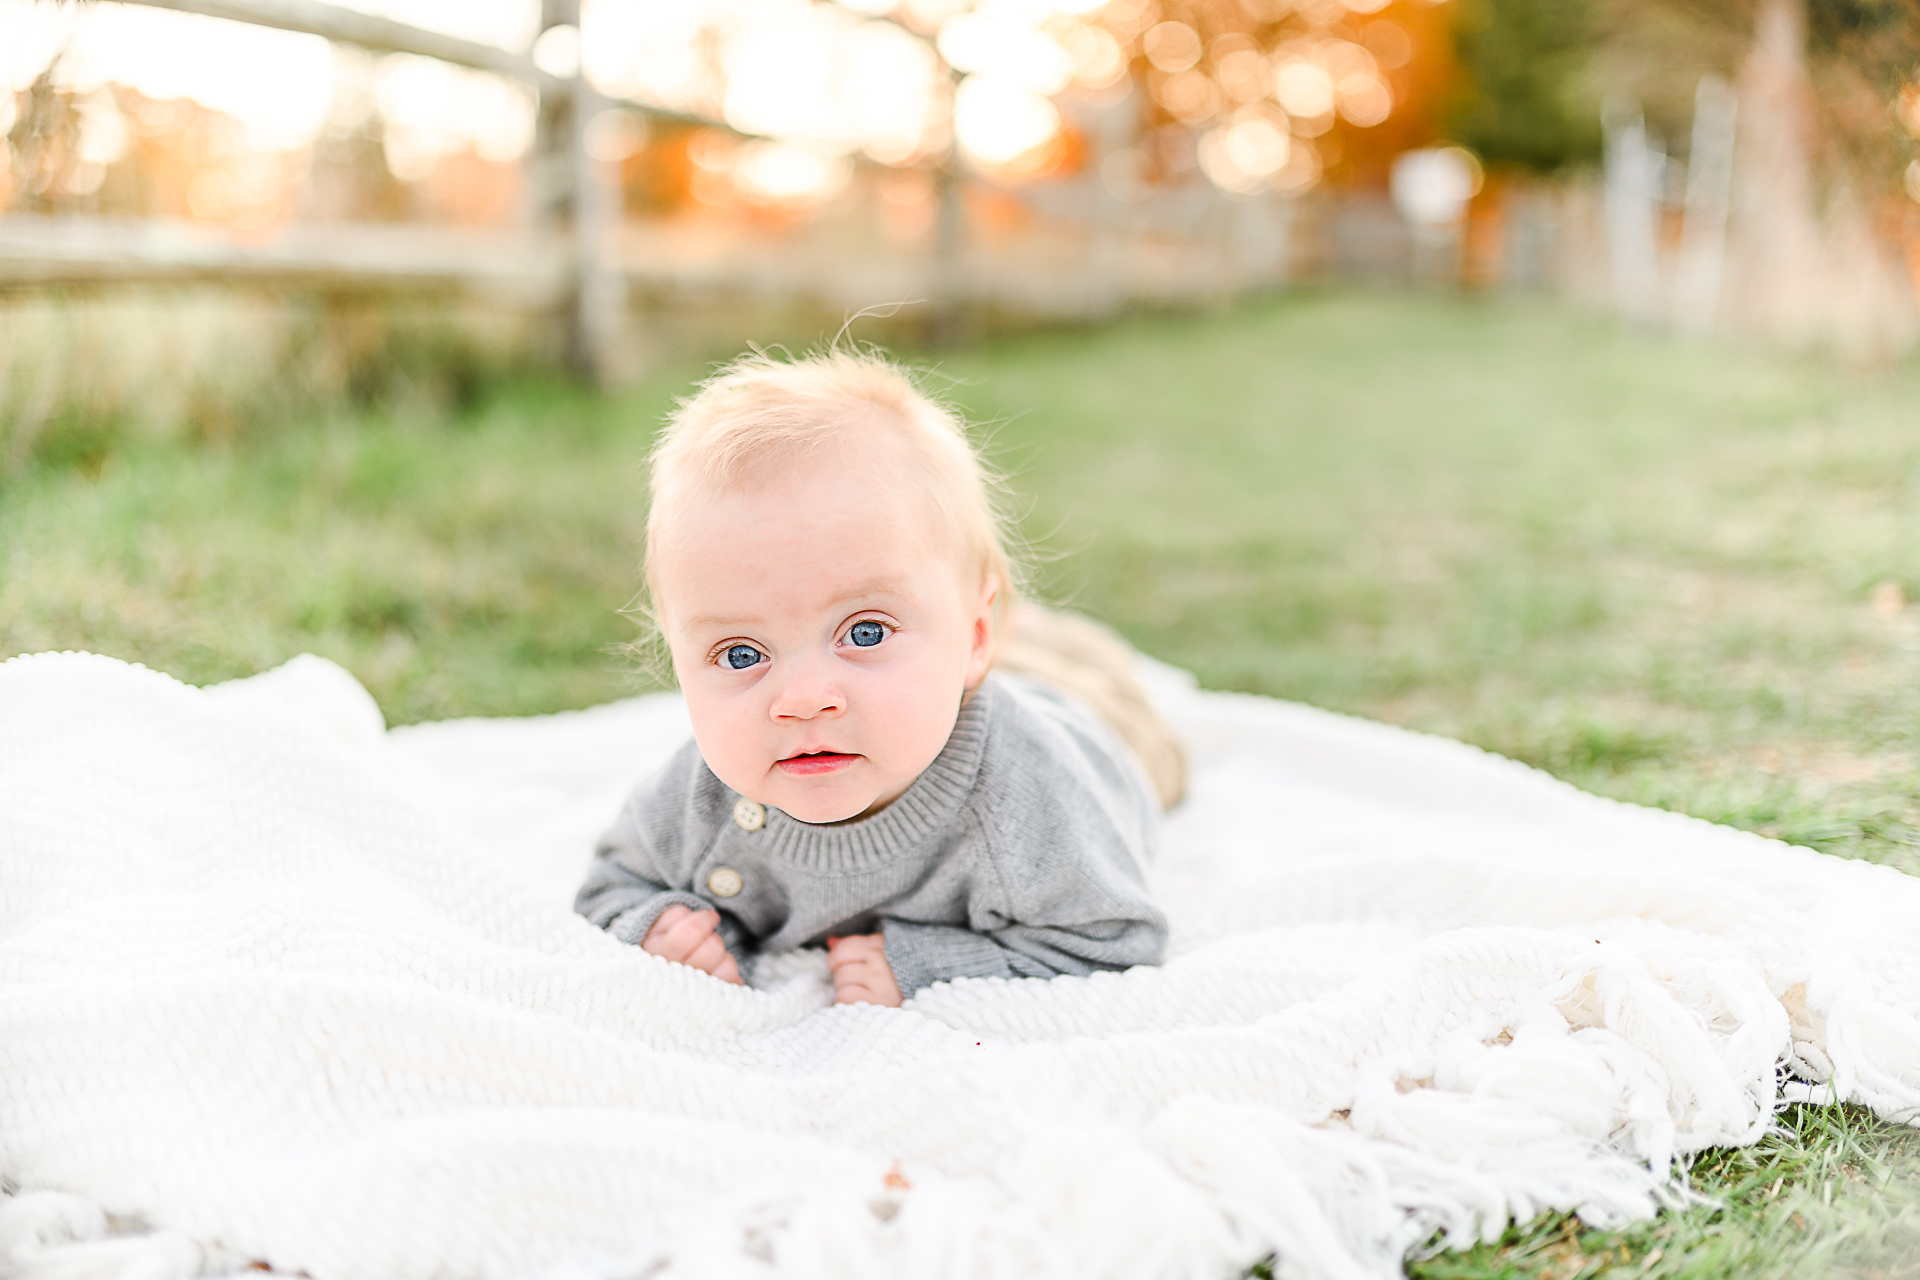 Photo by Norwell Photographer Christina Runnals | Baby laying on a white blanket in the grass